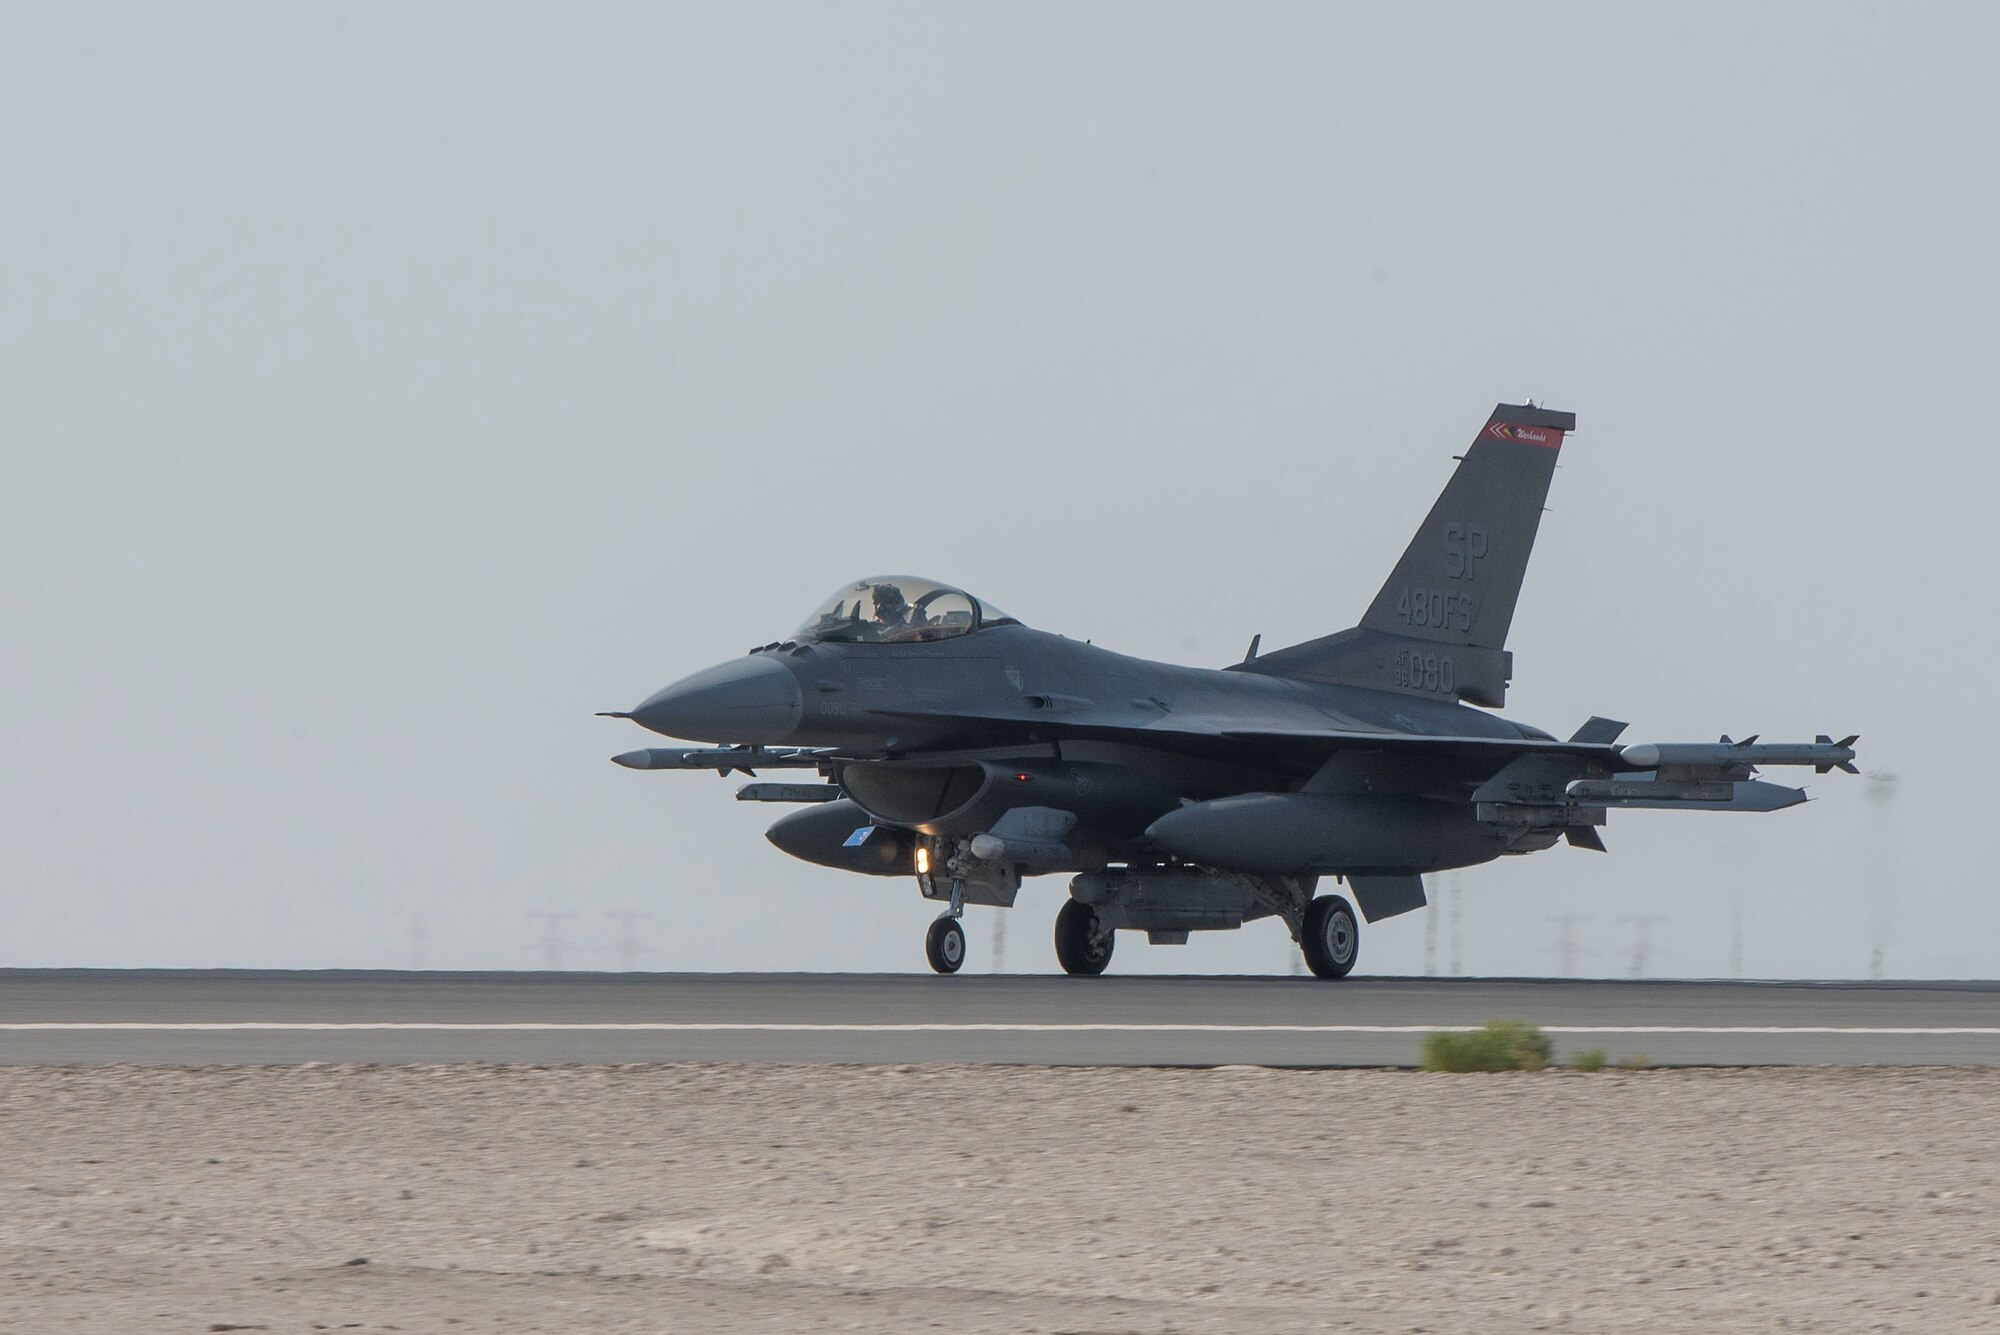 A U.S. Air Force F-16 Fighting Falcon assigned to the 480th Fighter Squadron taxis on the flightline upon arrival at Al Dhafra Air Base, United Arab Emirates, Nov. 12, 2020.